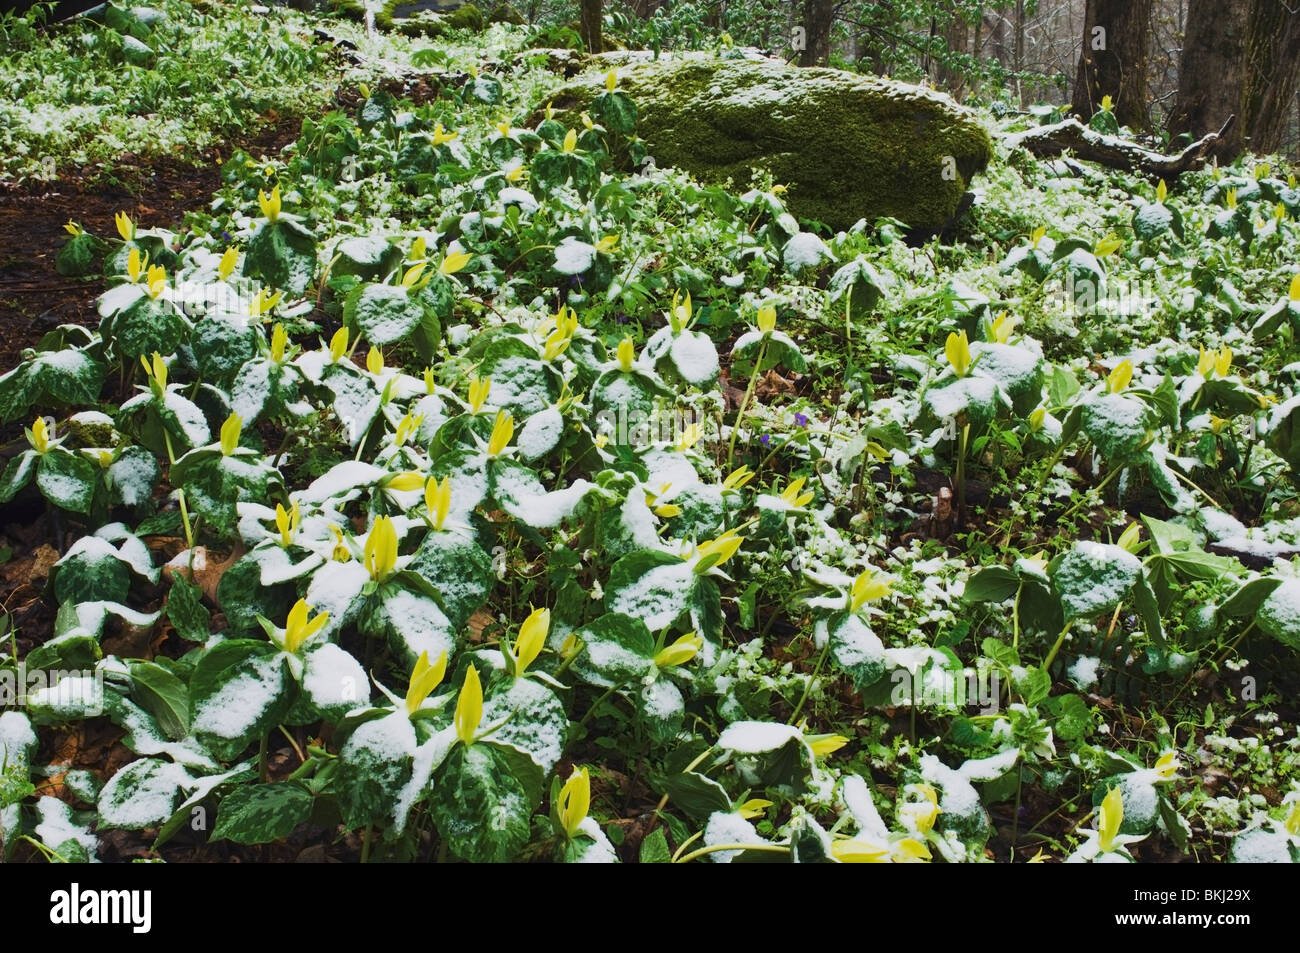 Great Smoky Mountains National Park, United States Of America; Snow On A Patch Of Yellow Trillium (Trillium Luteum) Wildflowers Stock Photo